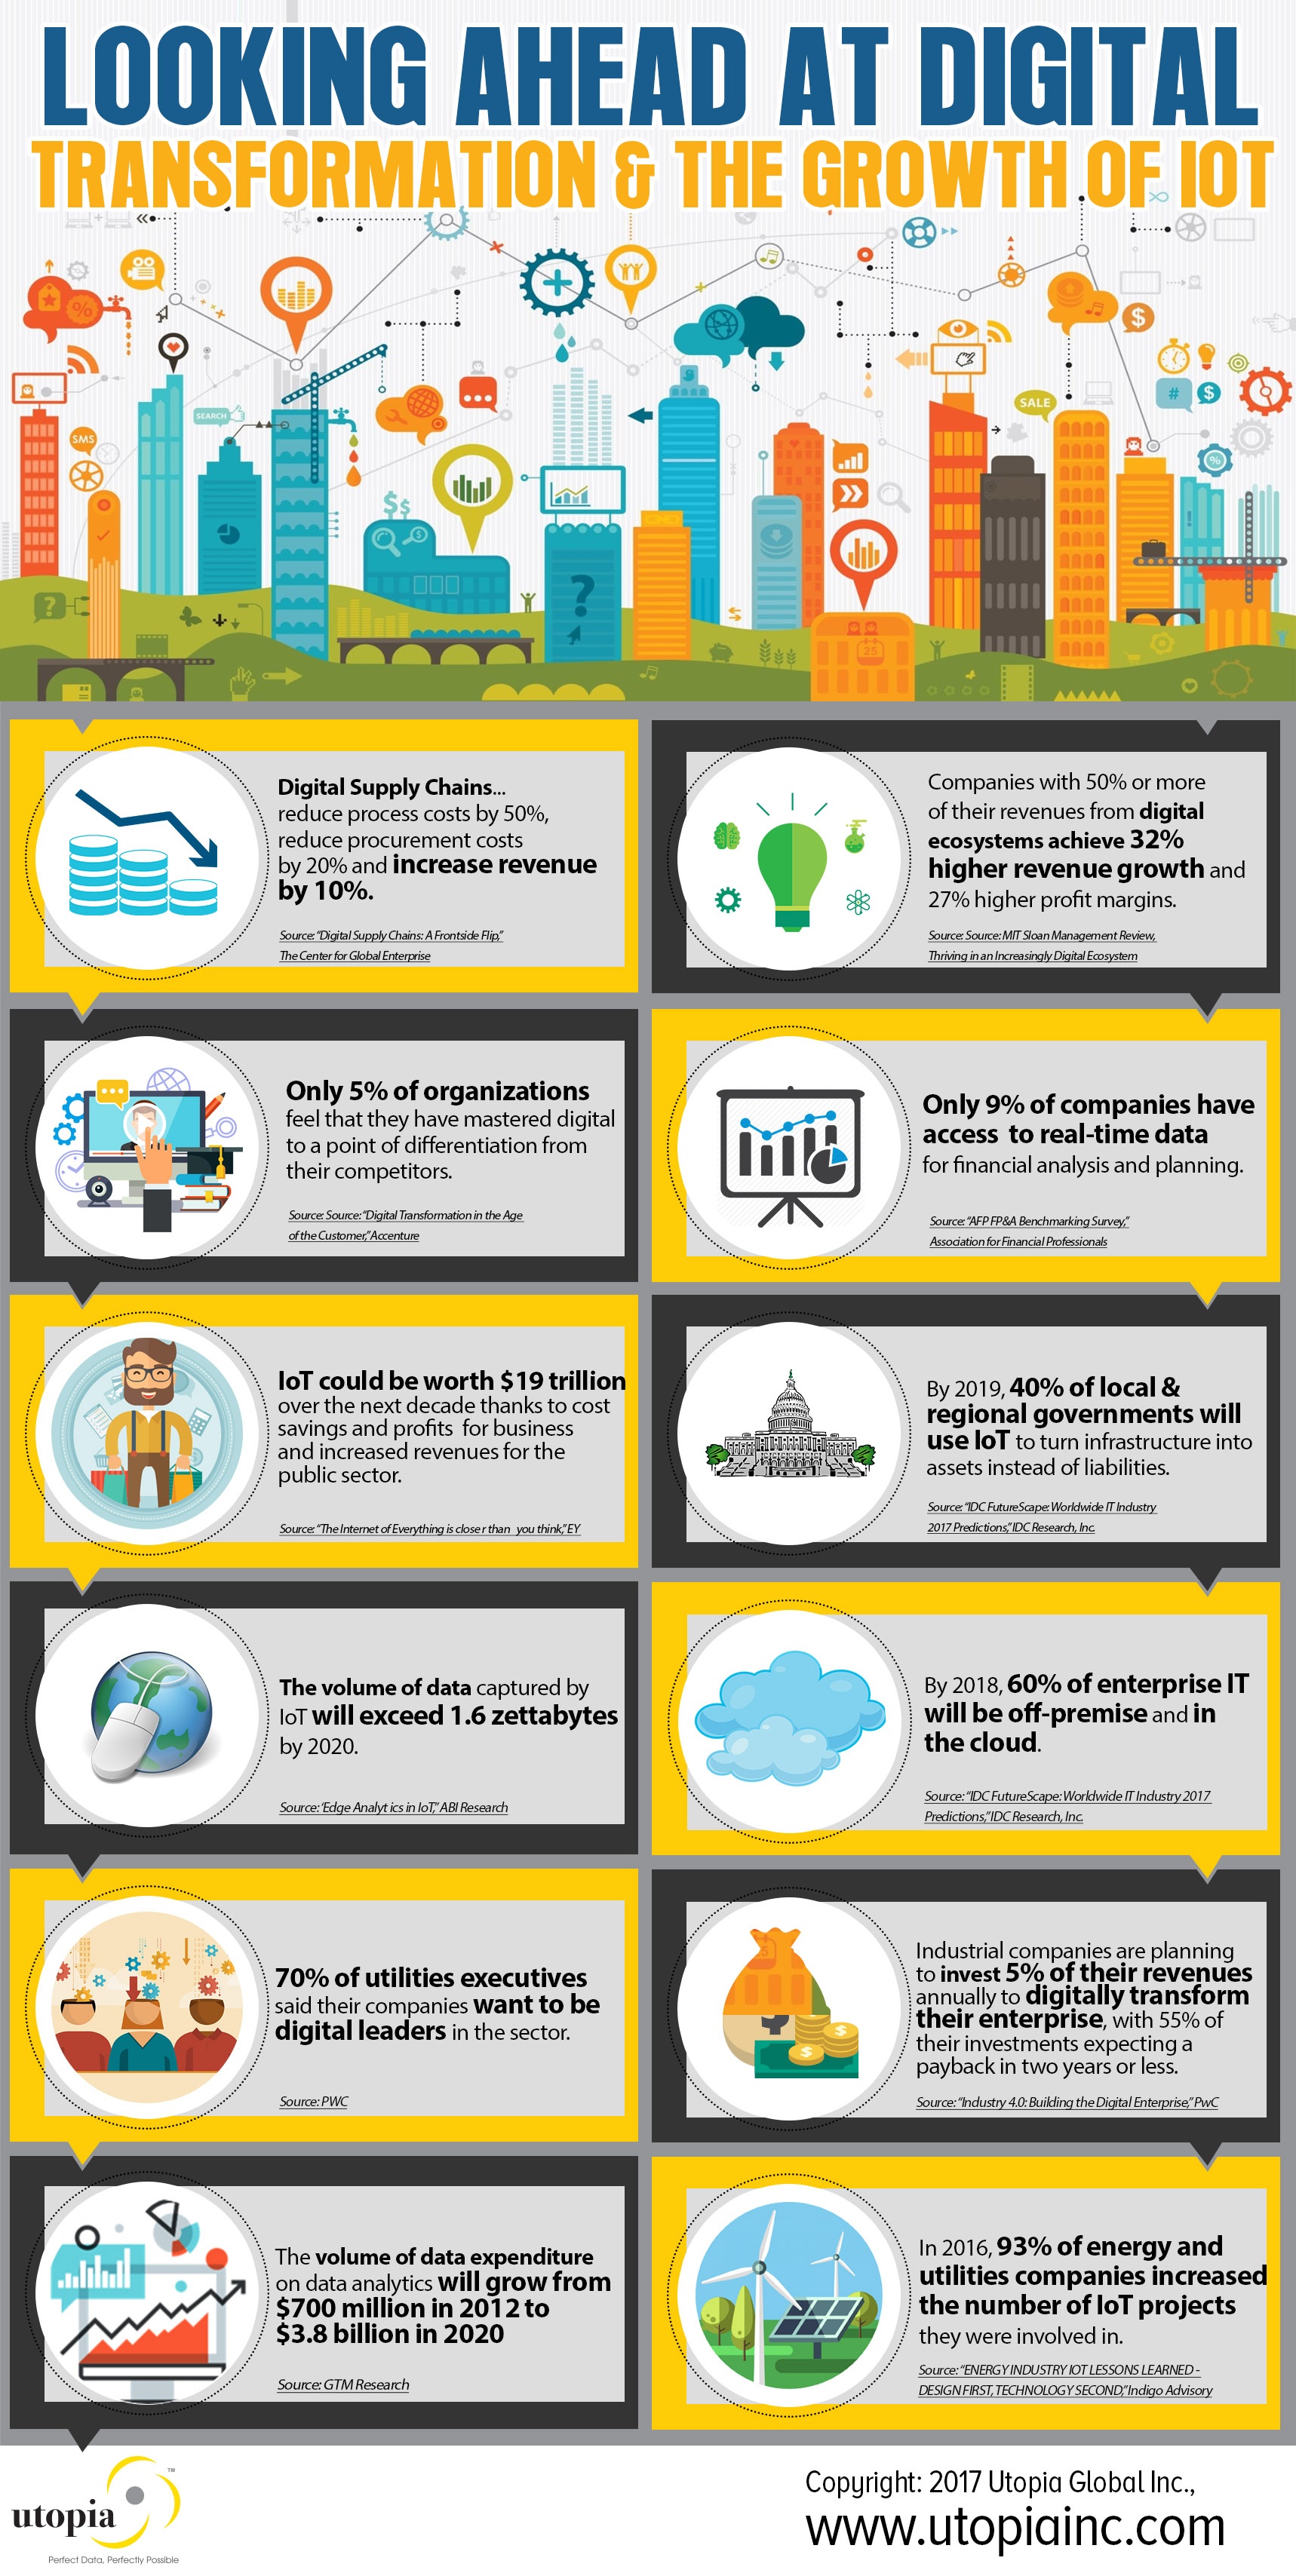 Digital Transformation and Growth of IoT Infographic-FINAL.jpg